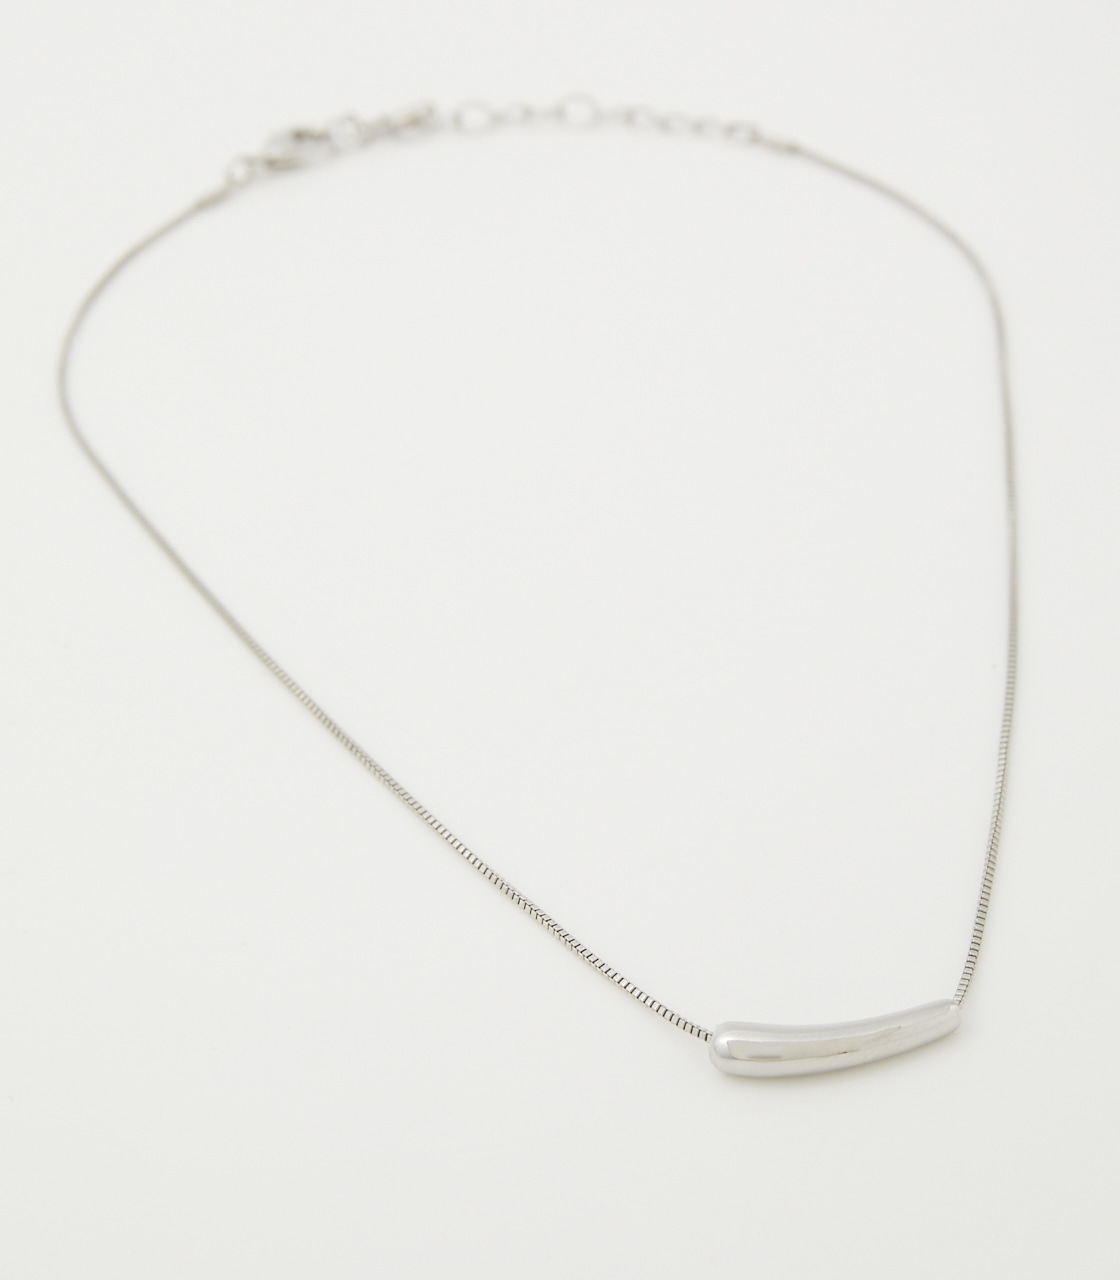 SIMPLE POLE NECKLACE/シンプルポールネックレス 詳細画像 SLV 2